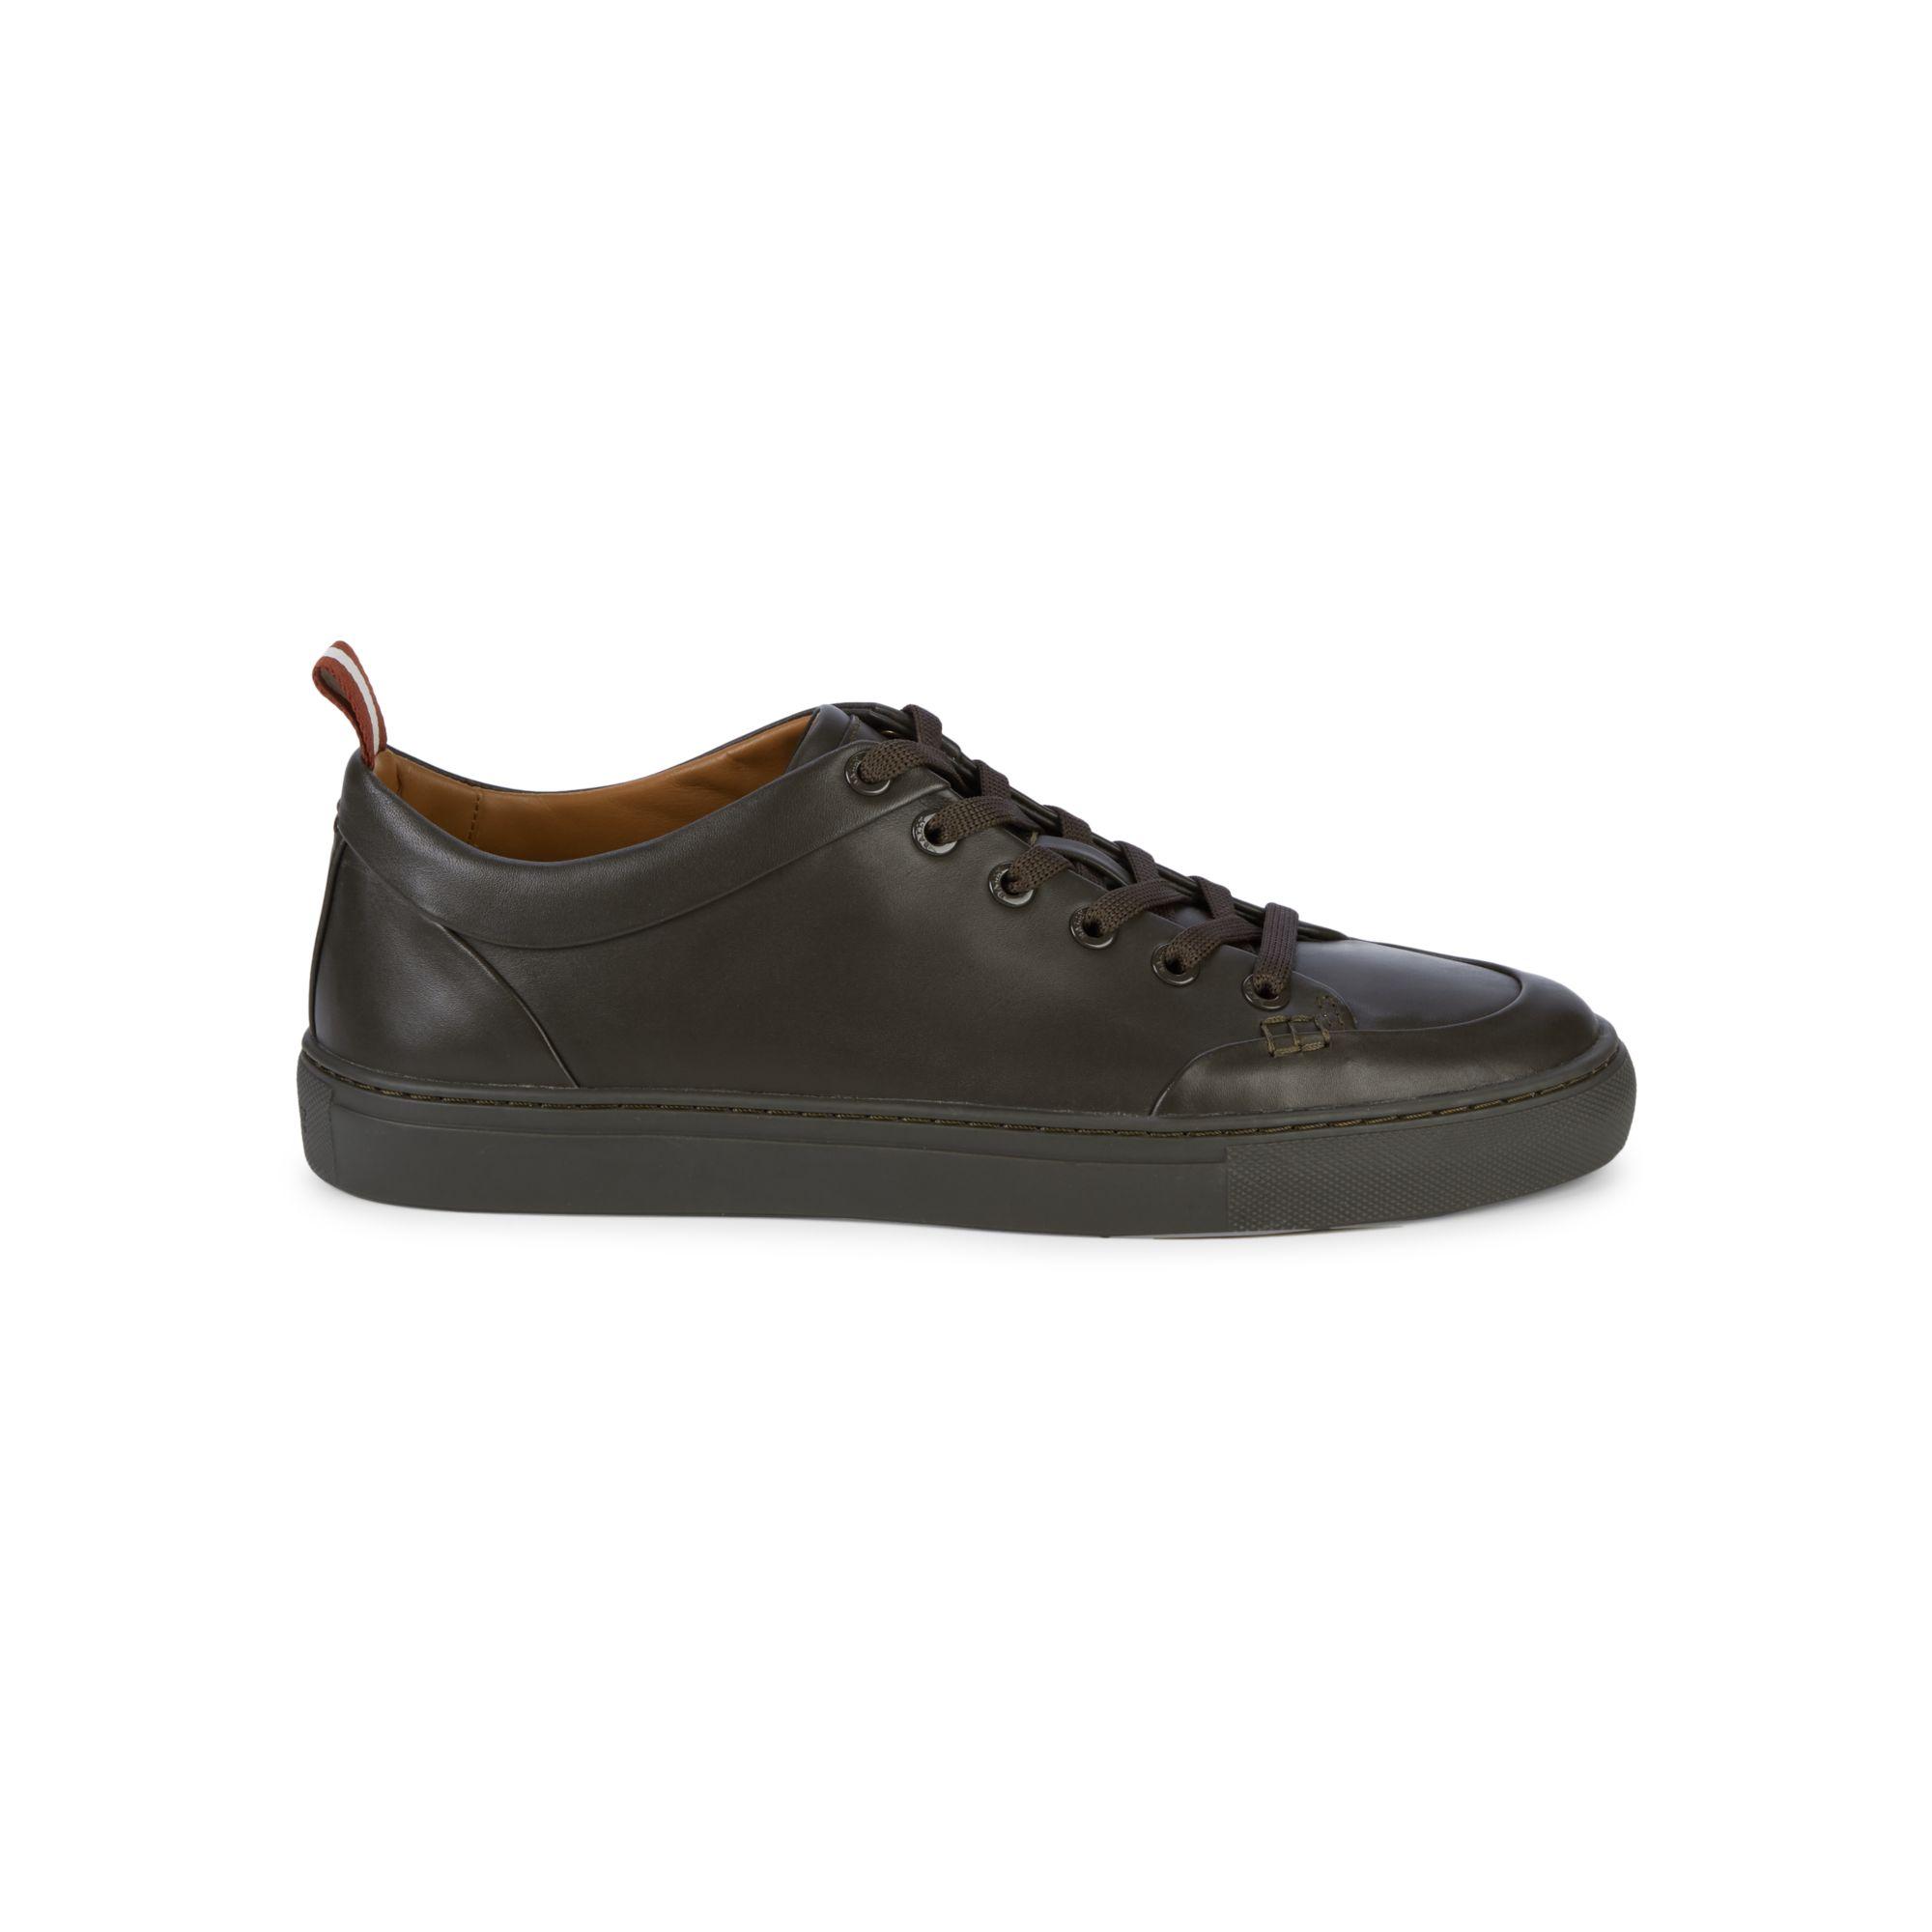 Bally Leather Sneakers in Black for Men - Lyst